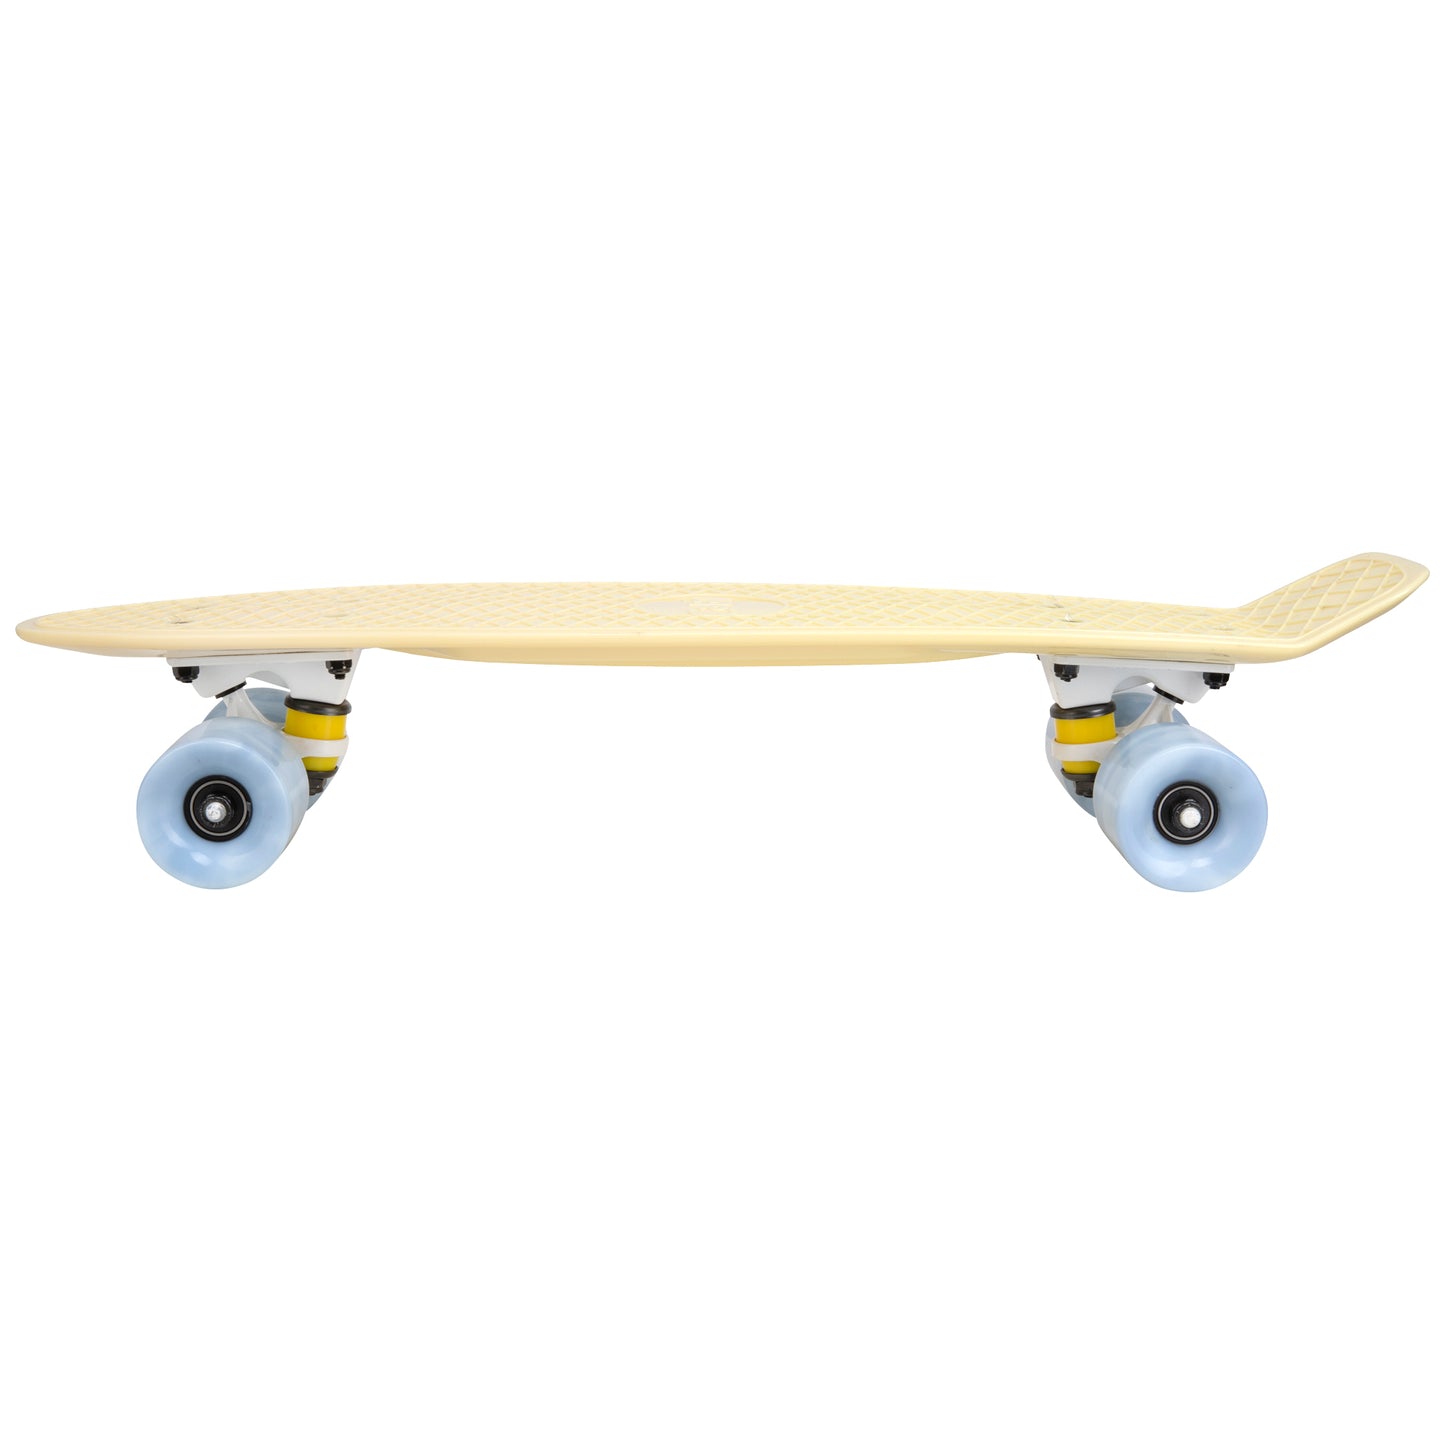 Cal 7 Snowdrop 22.5” Mini Cruiser with Swirl Wheels - featuring a pastel yellow plastic deck with 78A grey swirl wheels. 